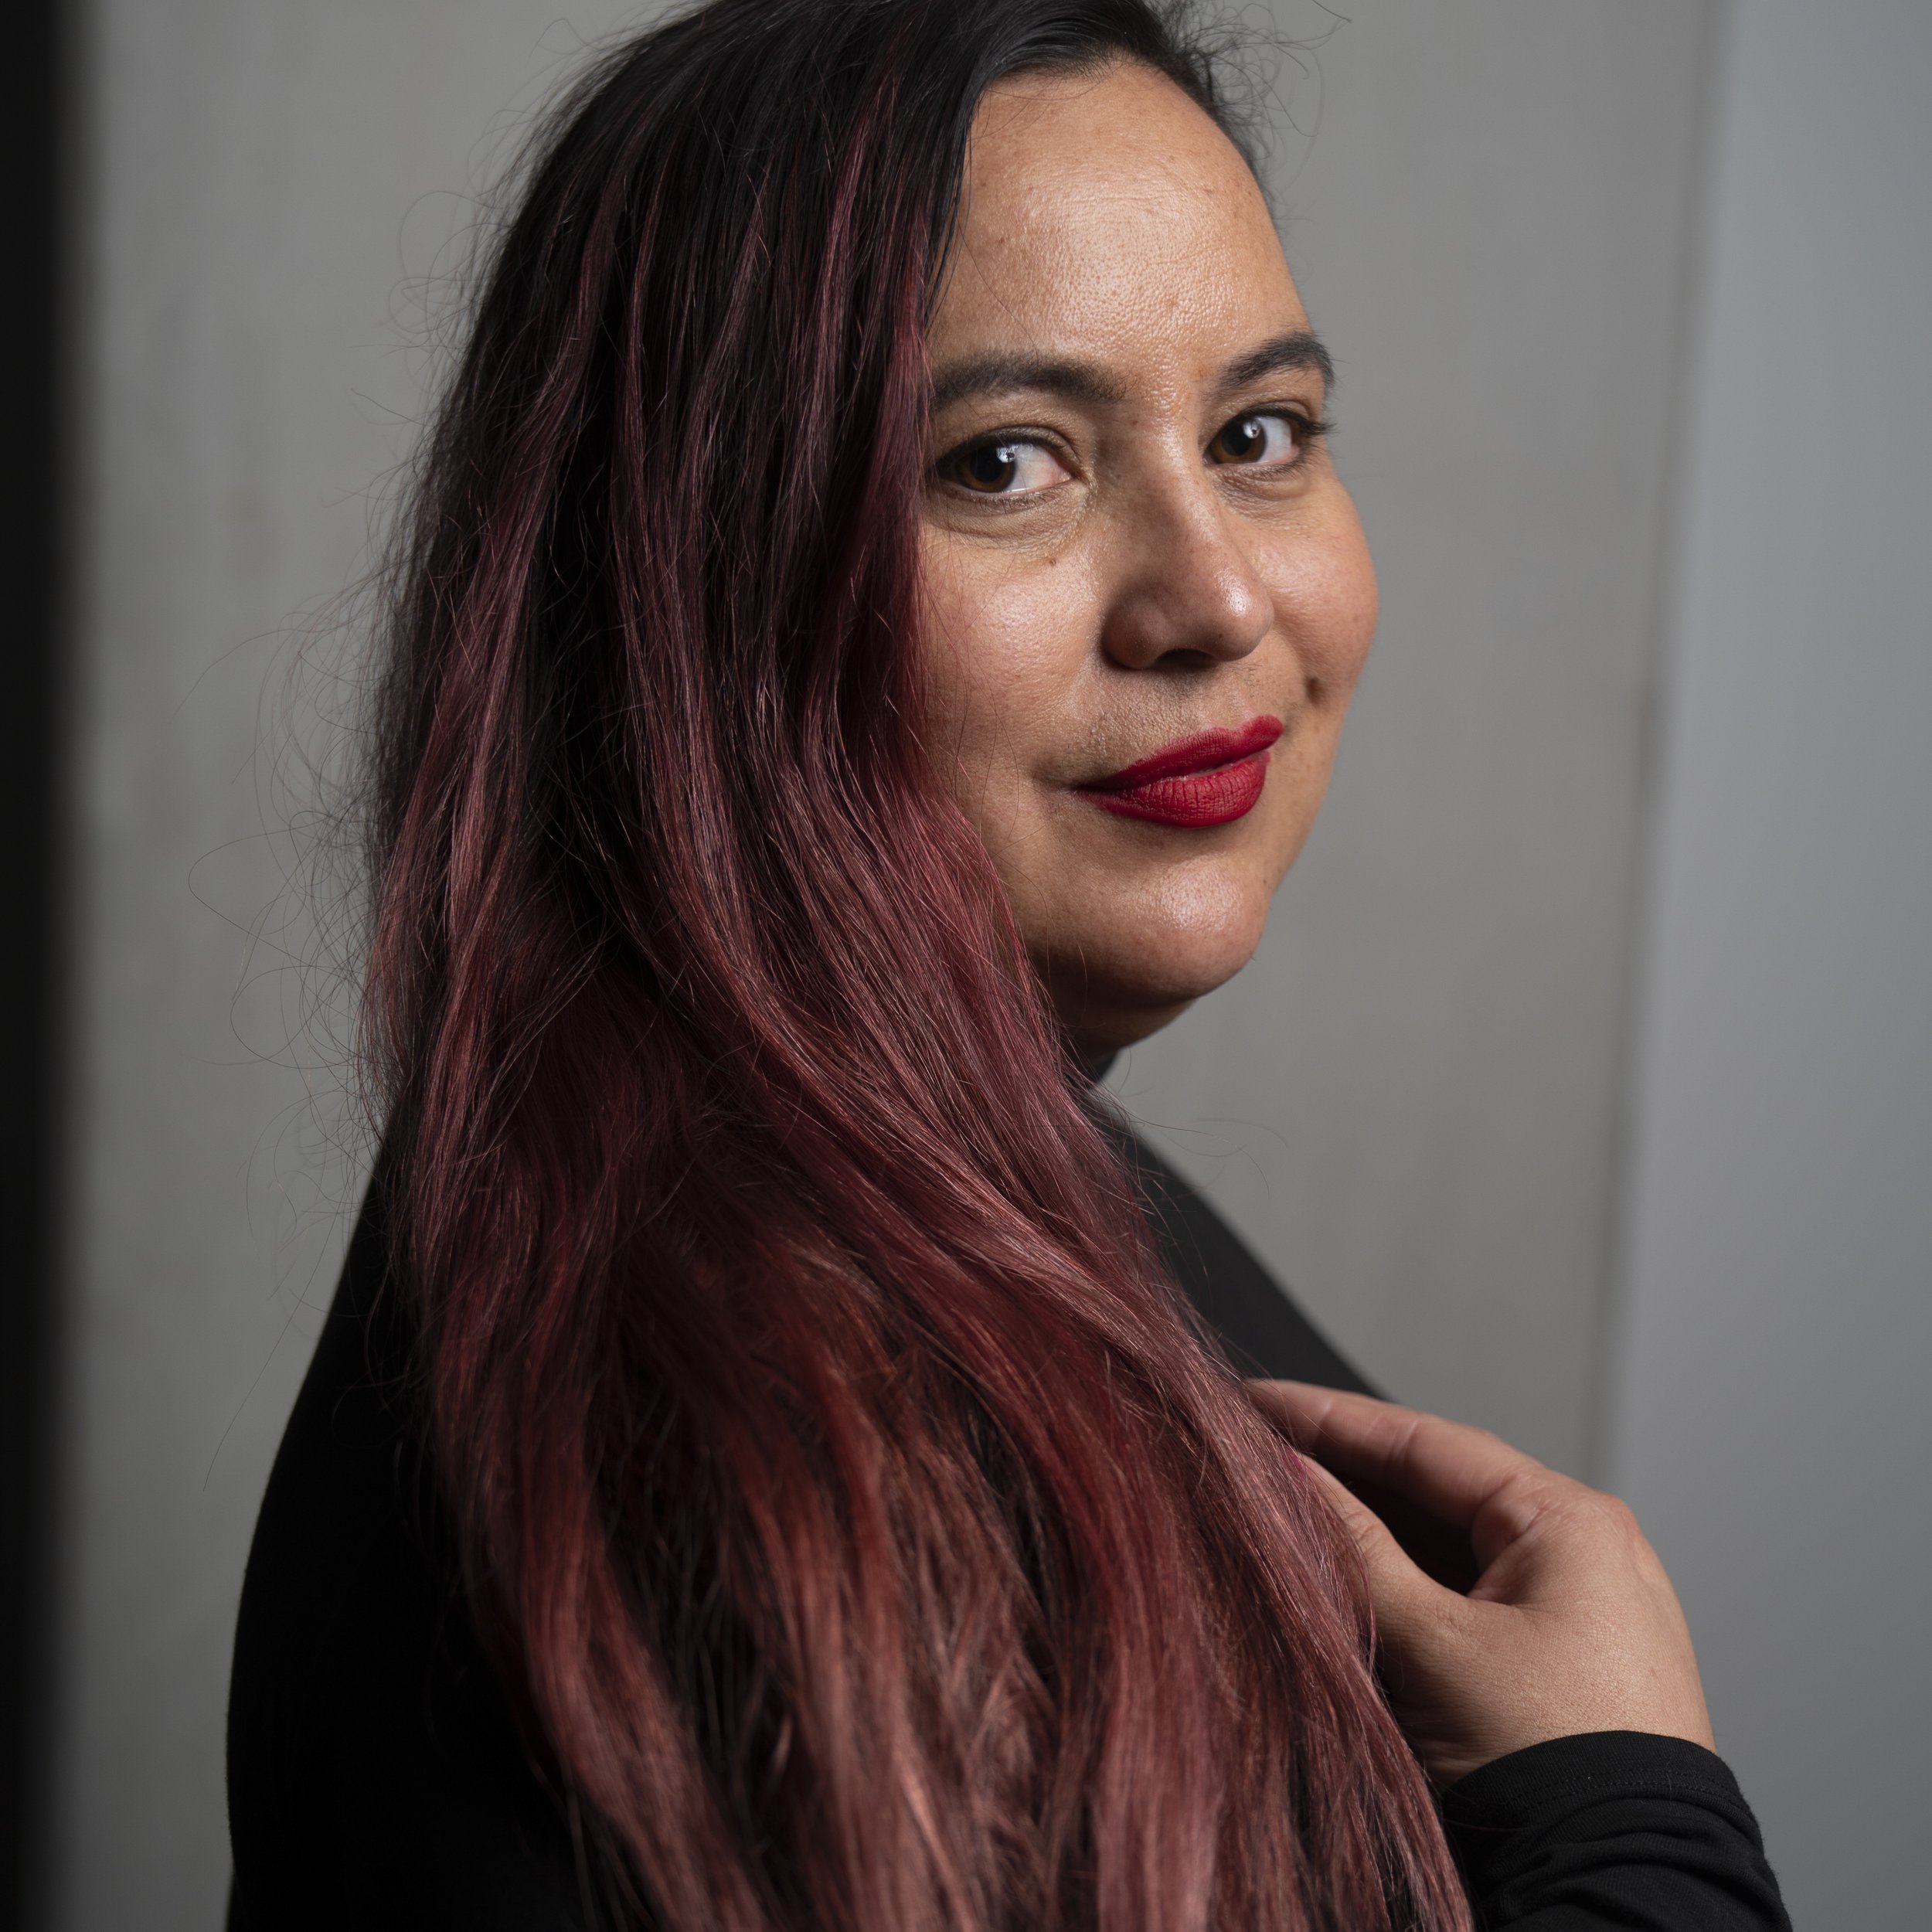 Renae Maihi, one of the winners of the Dramatic Feature Award for the film “We Are Still Here”. Image by Danielle Khan Da Silva.